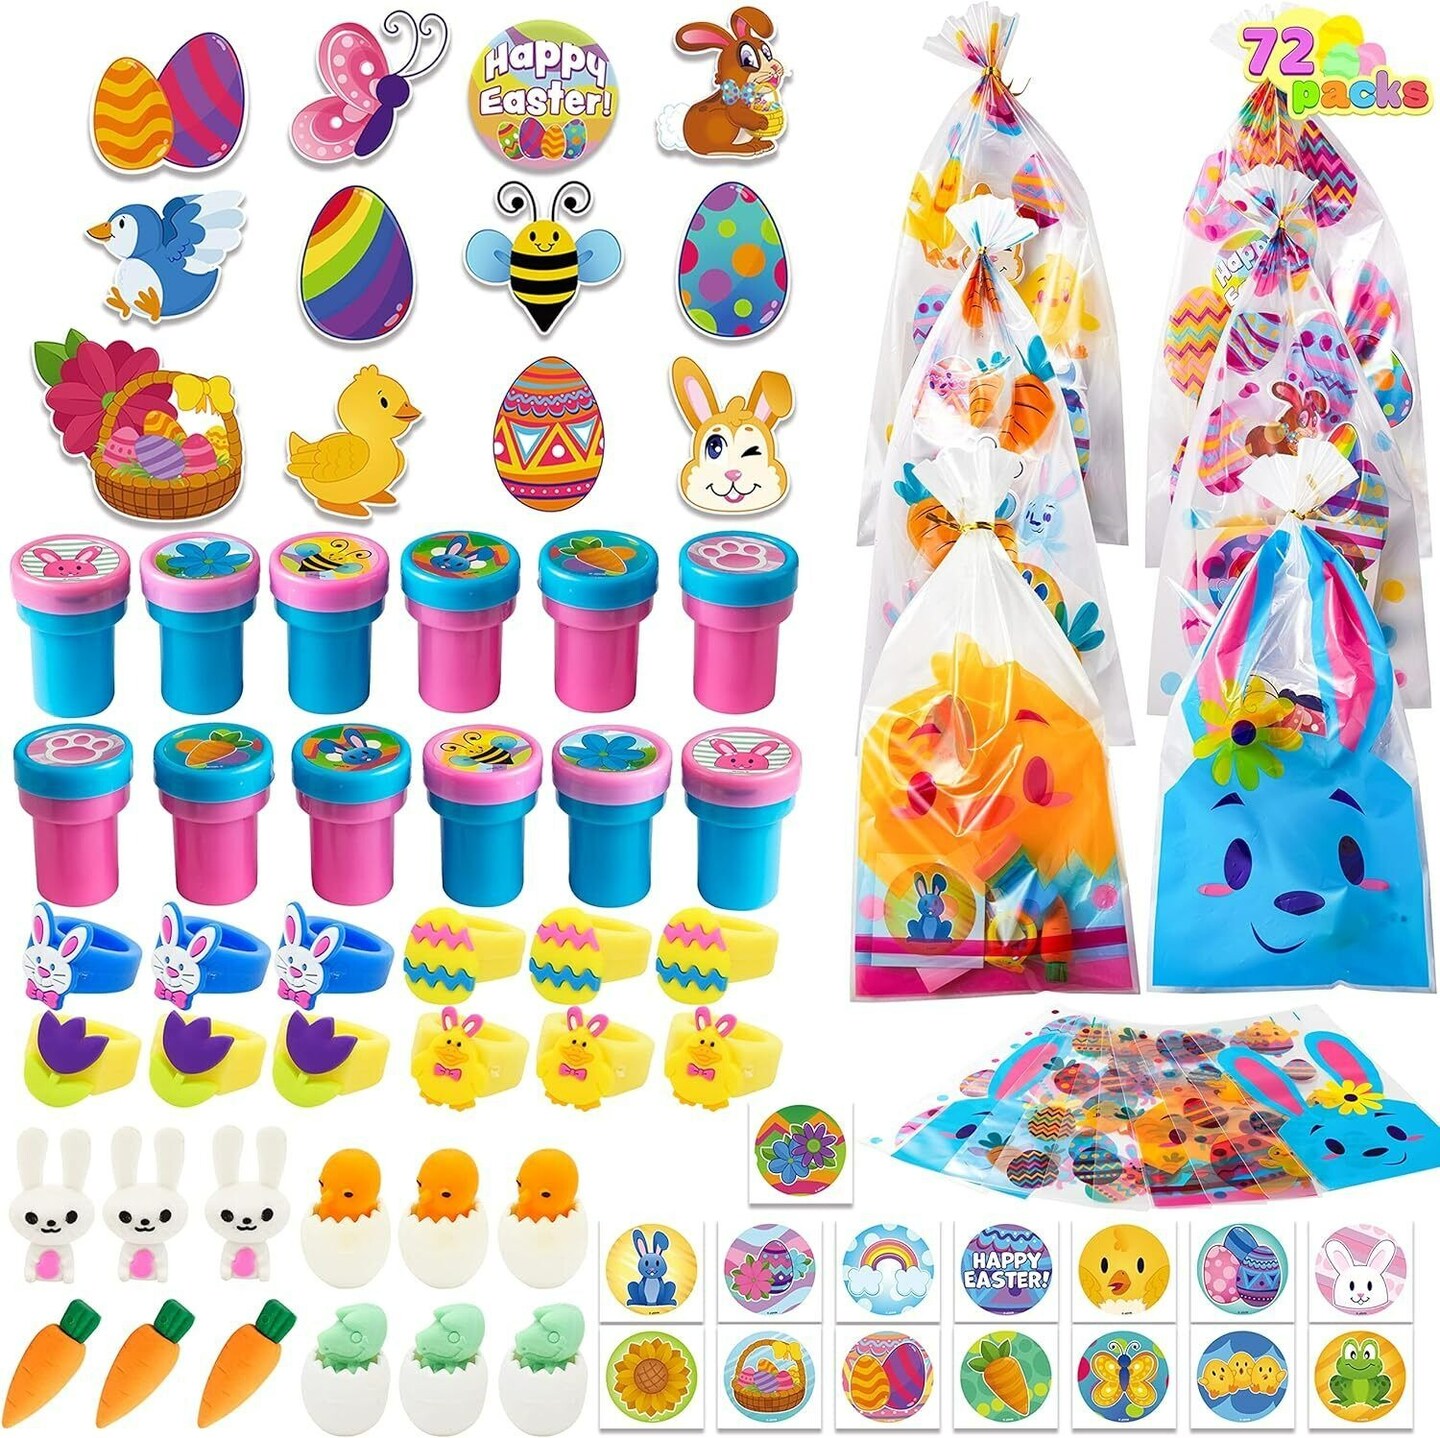 72 Pcs Easter Party Favors Set, 12 Packs Assorted Goody Bags with Easter